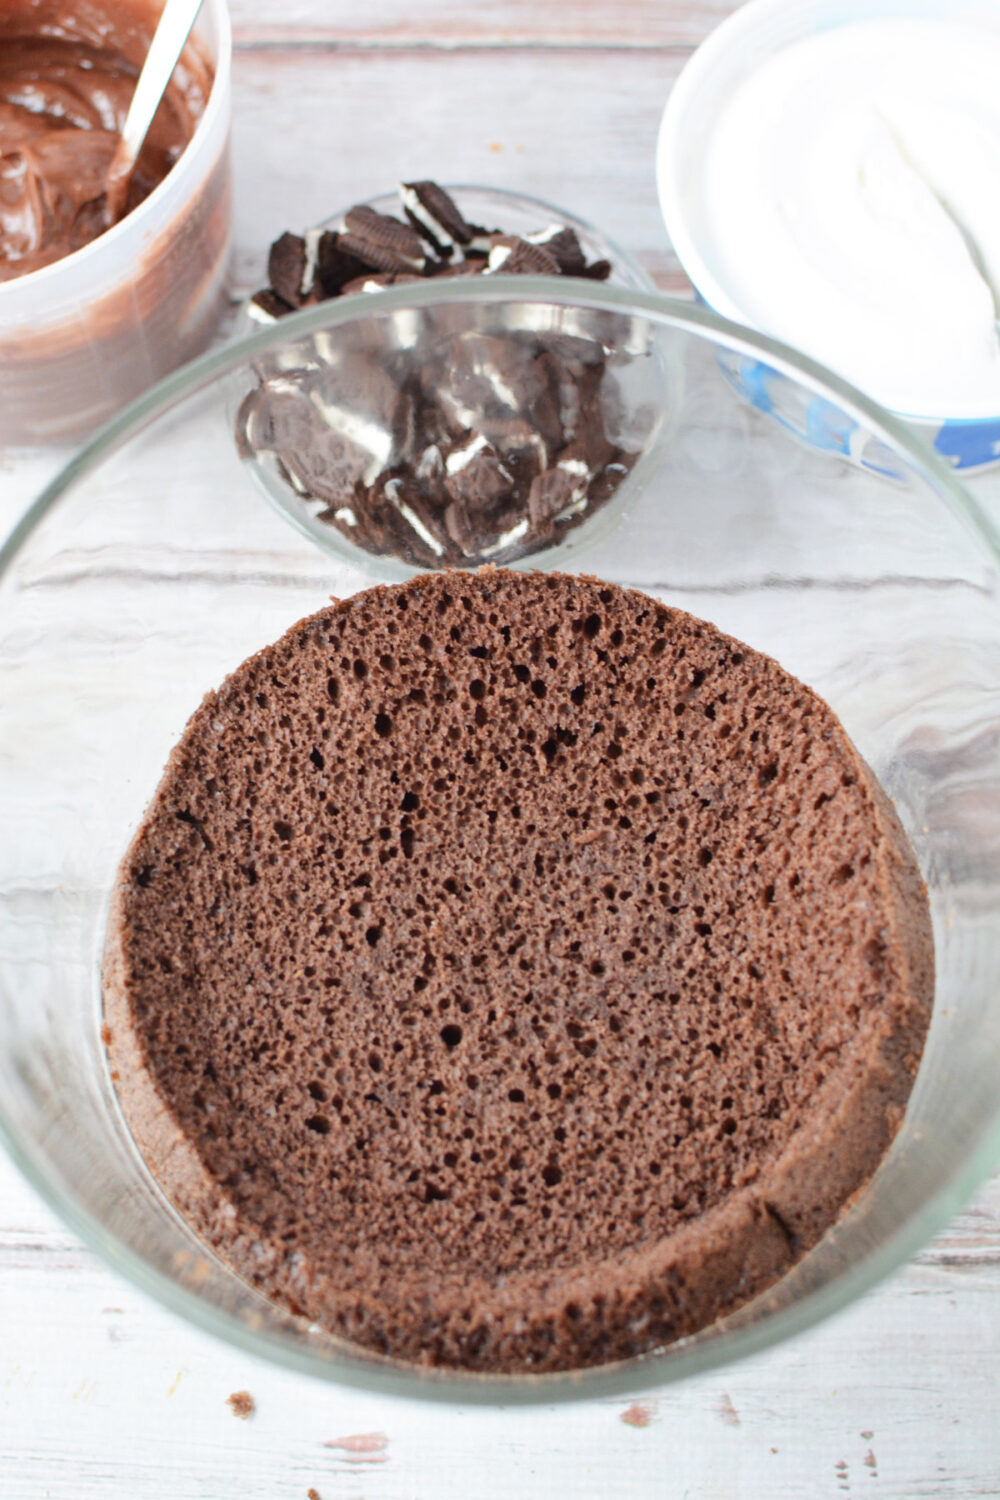 Chocolate cake in a trifle dish.